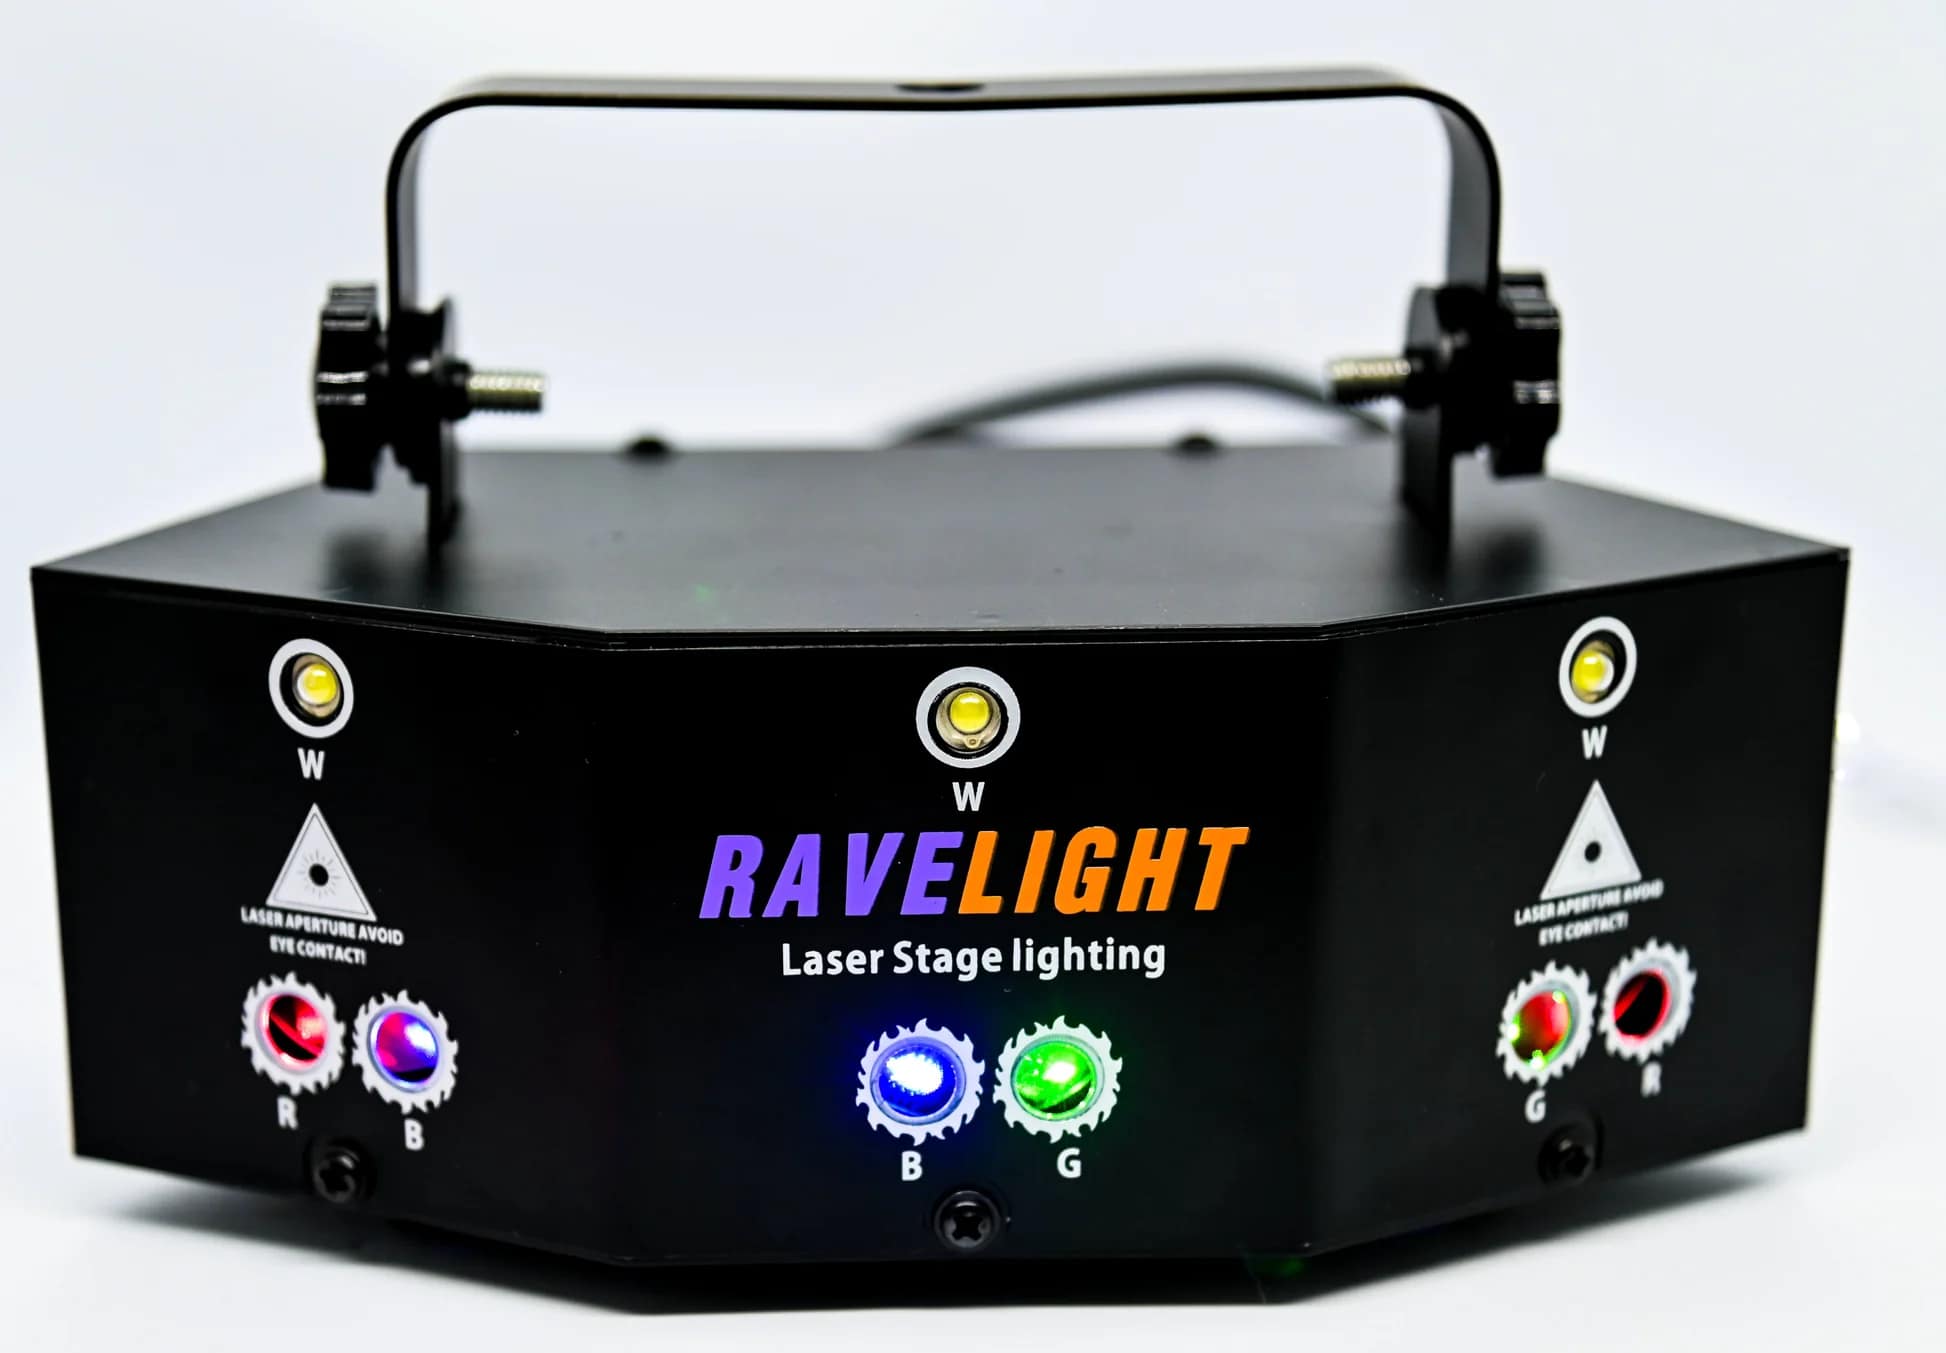 The Ravelight 9-Eye Party Laser Lights Projector